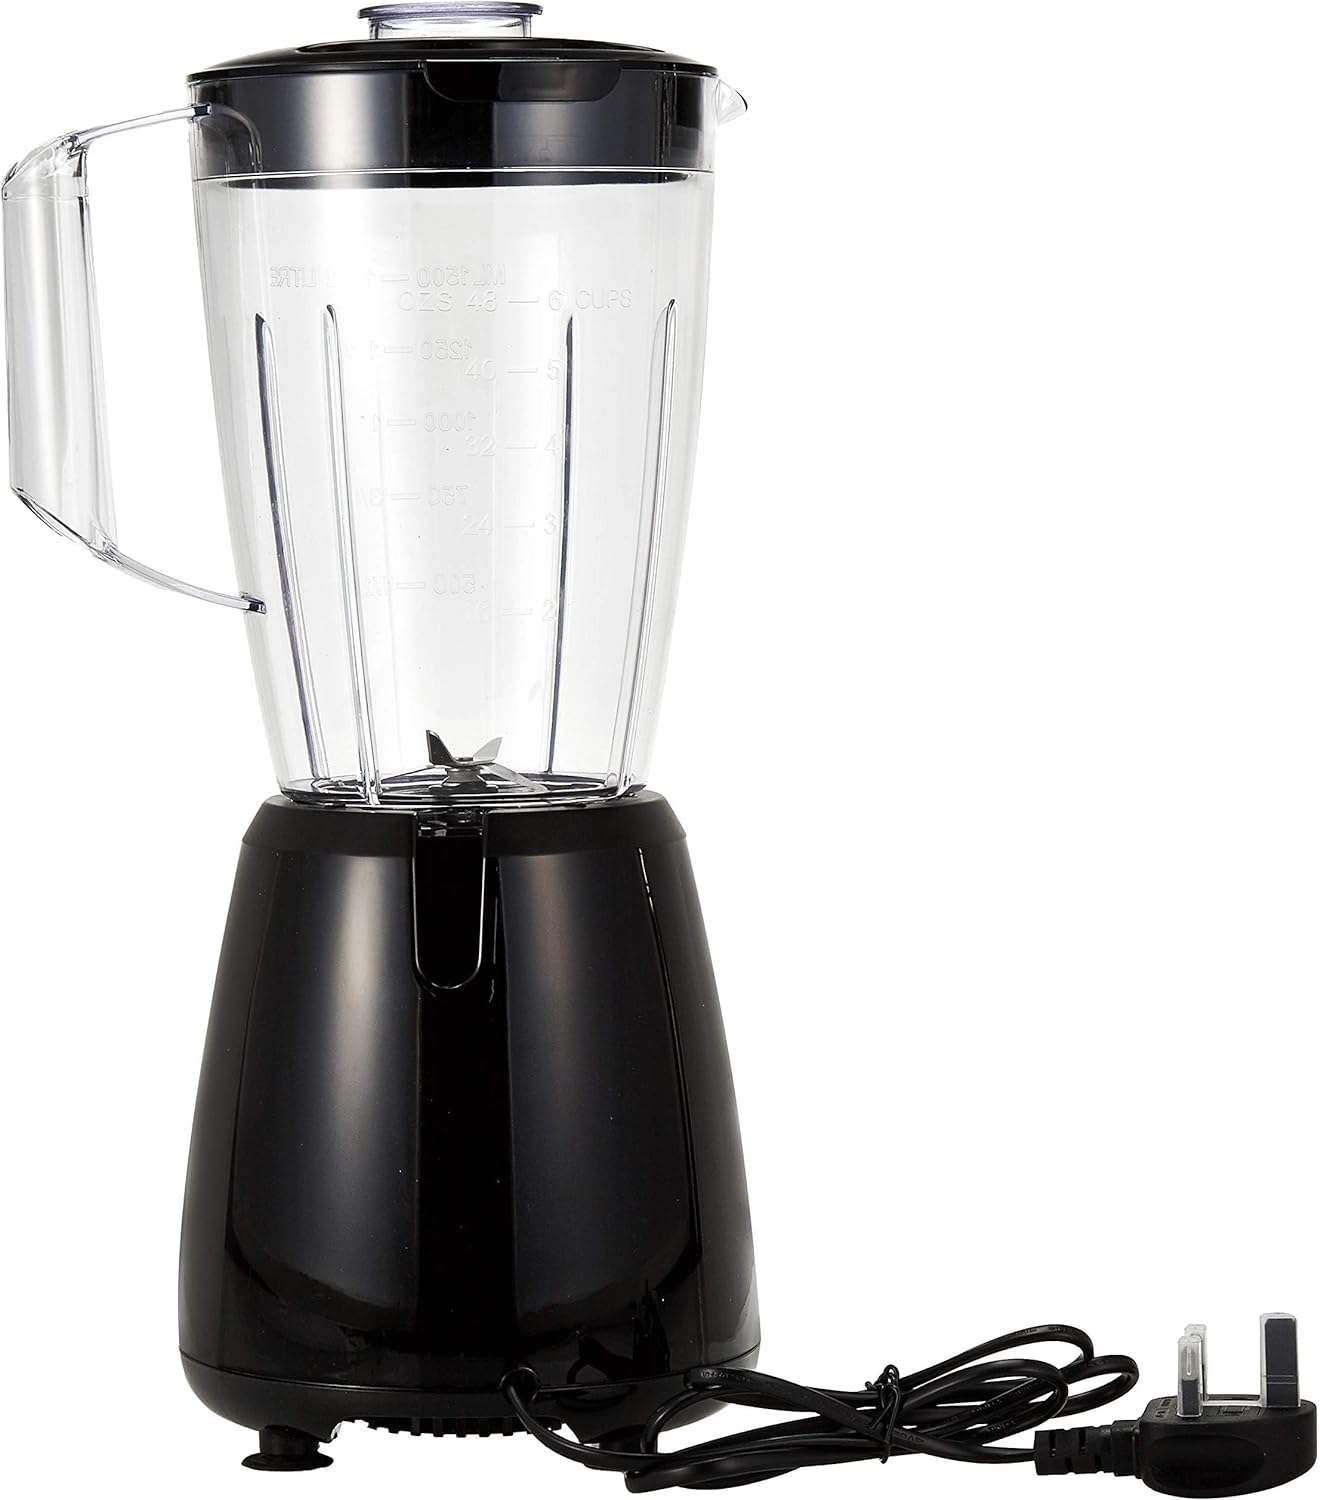 BLACK+DECKER Blender with Grinder Mills, 400W Power, 1.5L with 300ml 2 Grinding Mills, Stainless Steel Blades and Two Pulse Control for Fine and Grinding of Coffee Herbs, BX440-B5